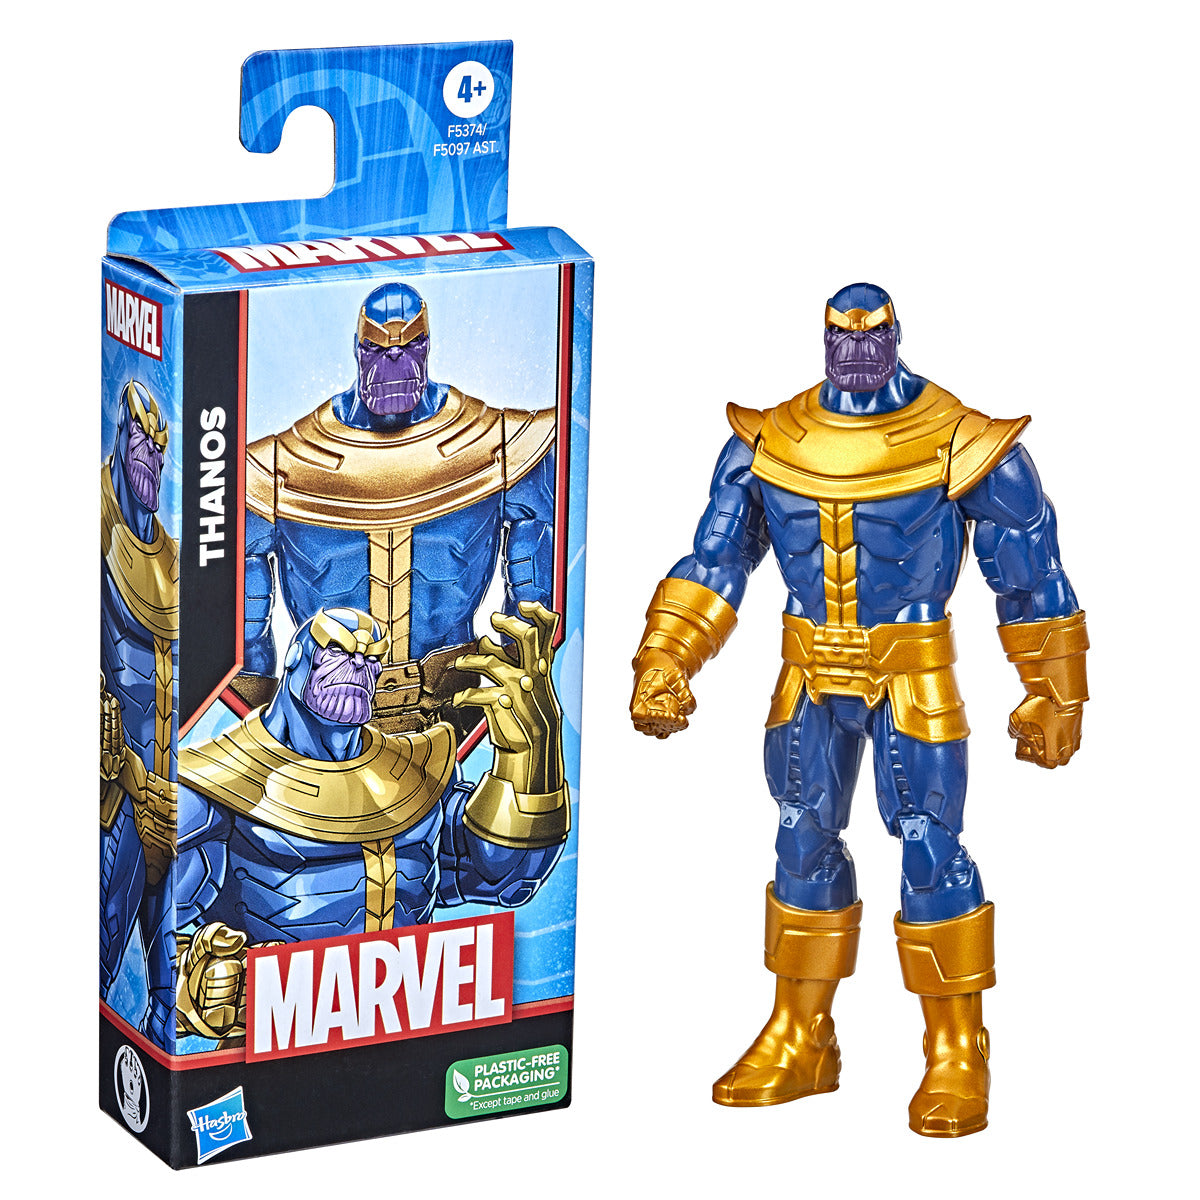 Marvel Classic Thanos 6 inch Value Figure for Ages 5+